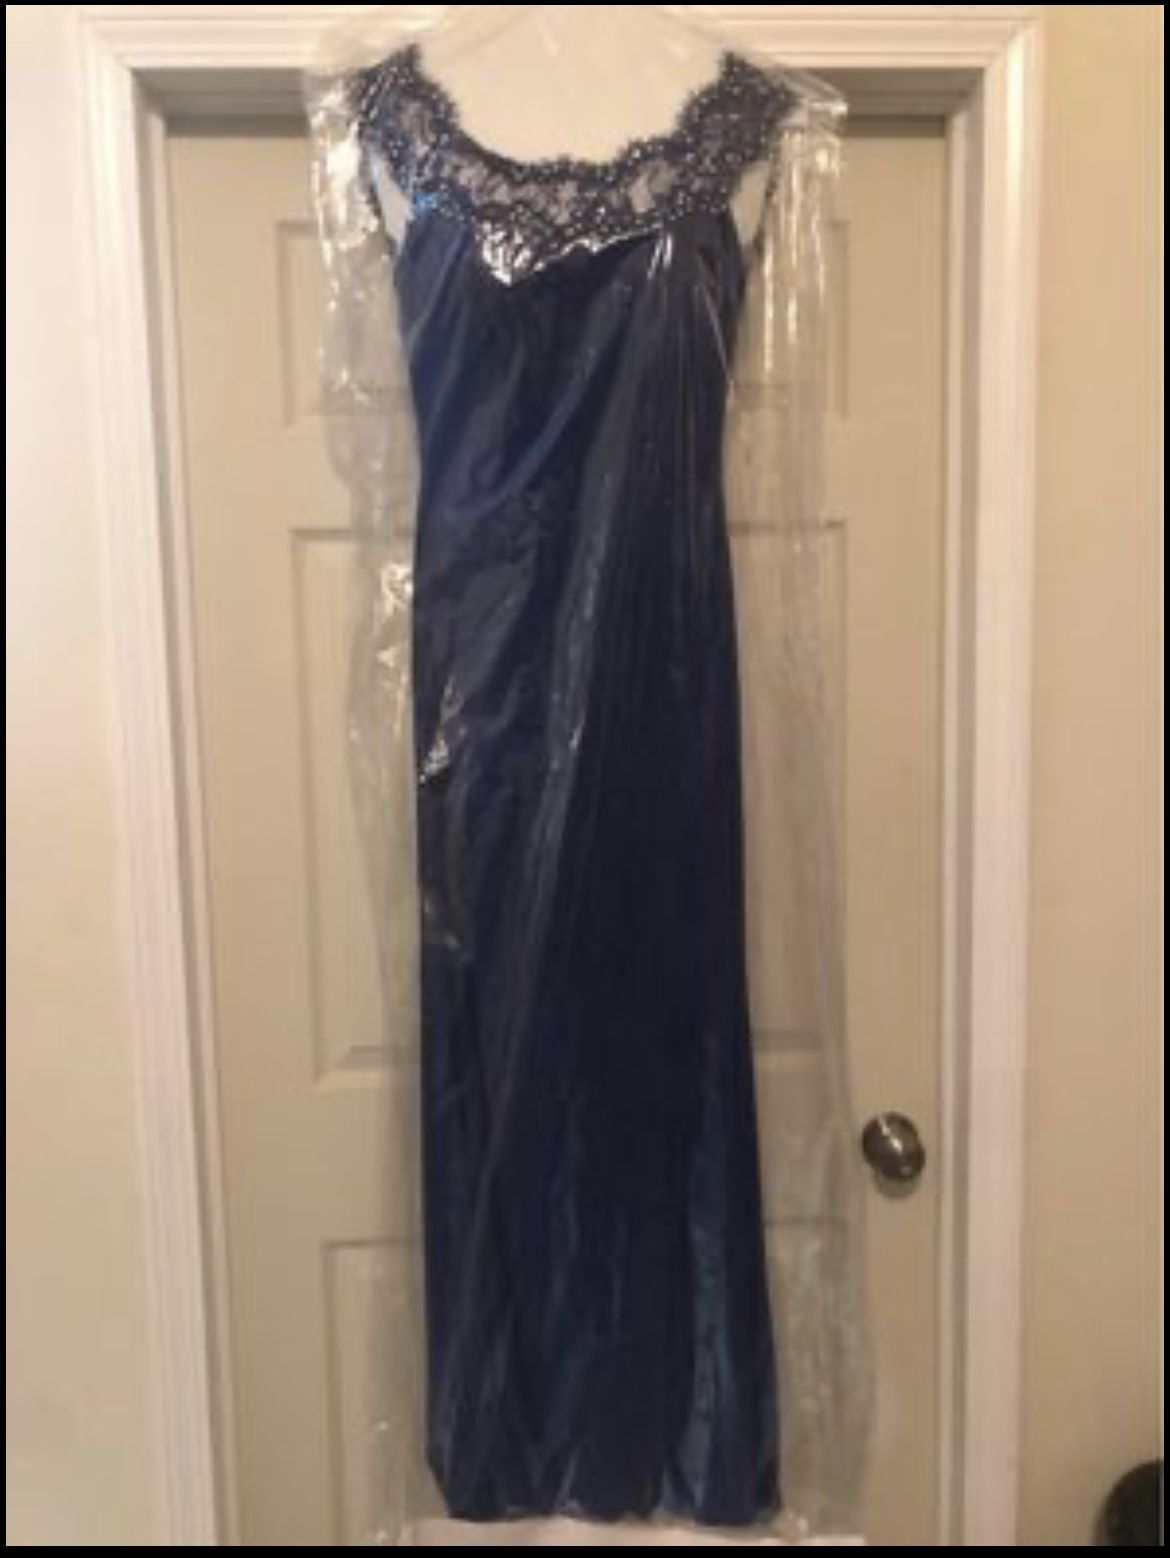 Madison James Size 6 Prom Blue Floor Length Maxi on Queenly